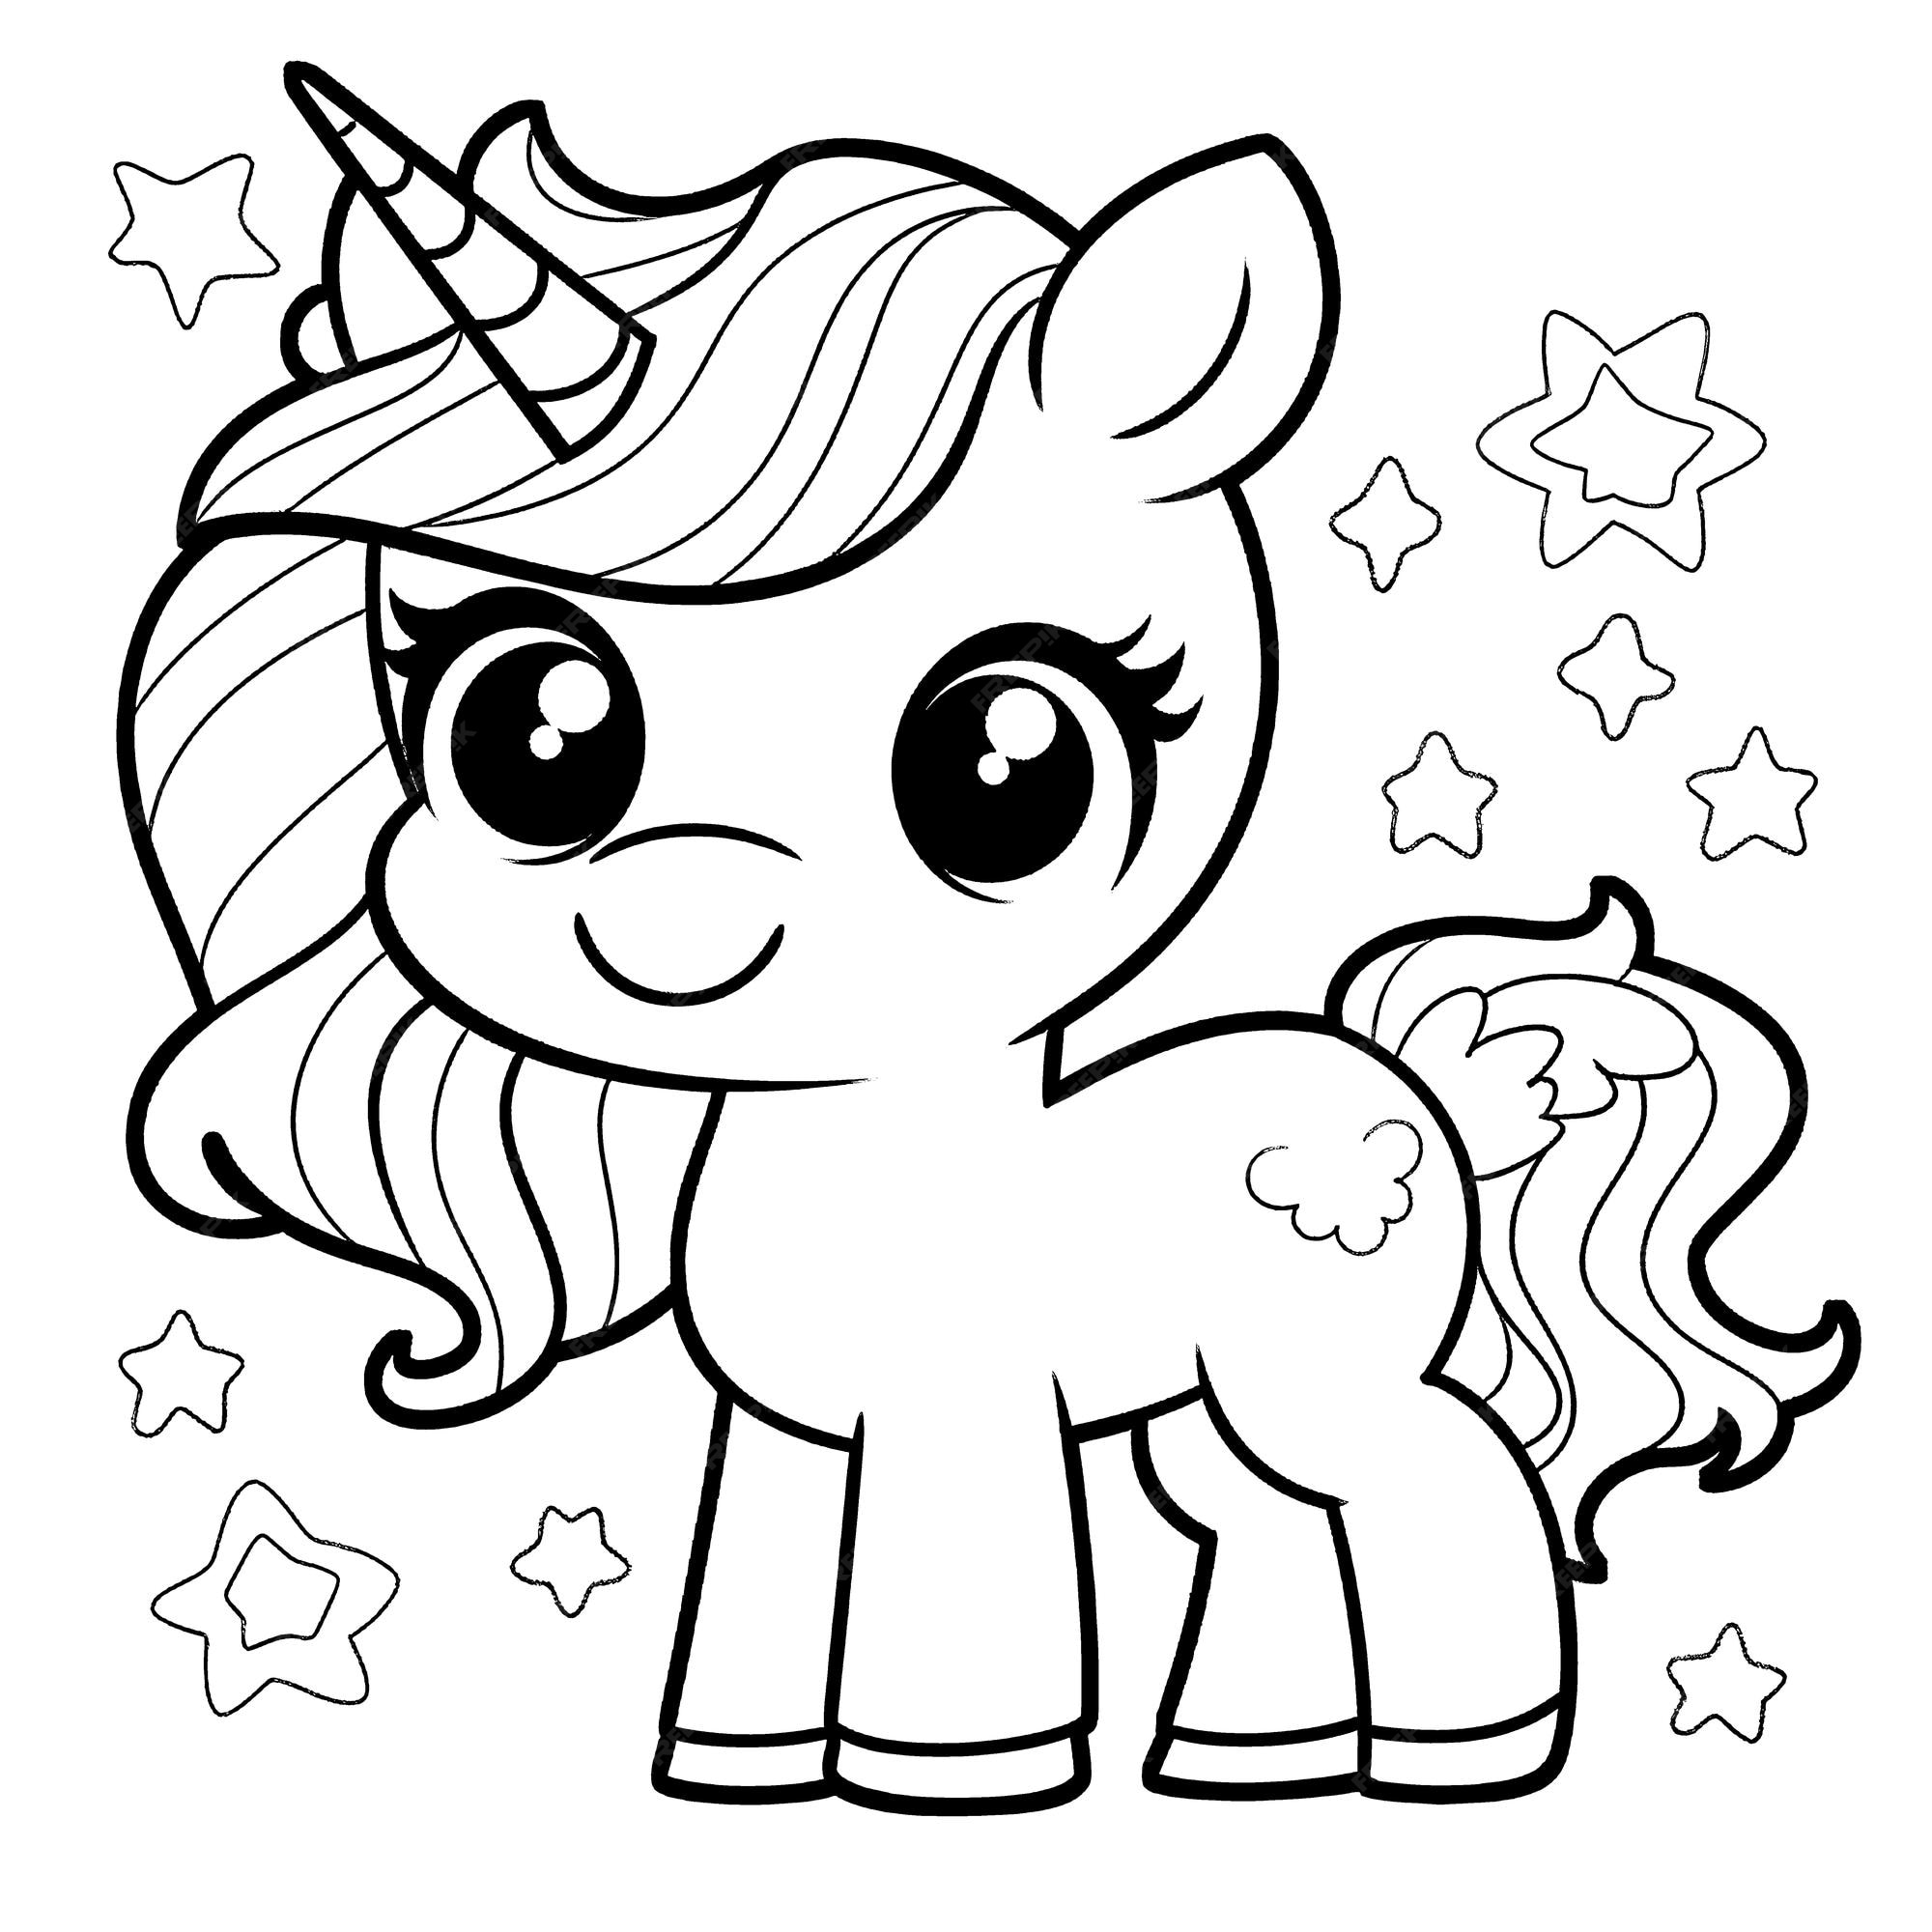 Premium vector unicorn black and white coloring page for kids and adults line art simple cartoon style happy cute and funny